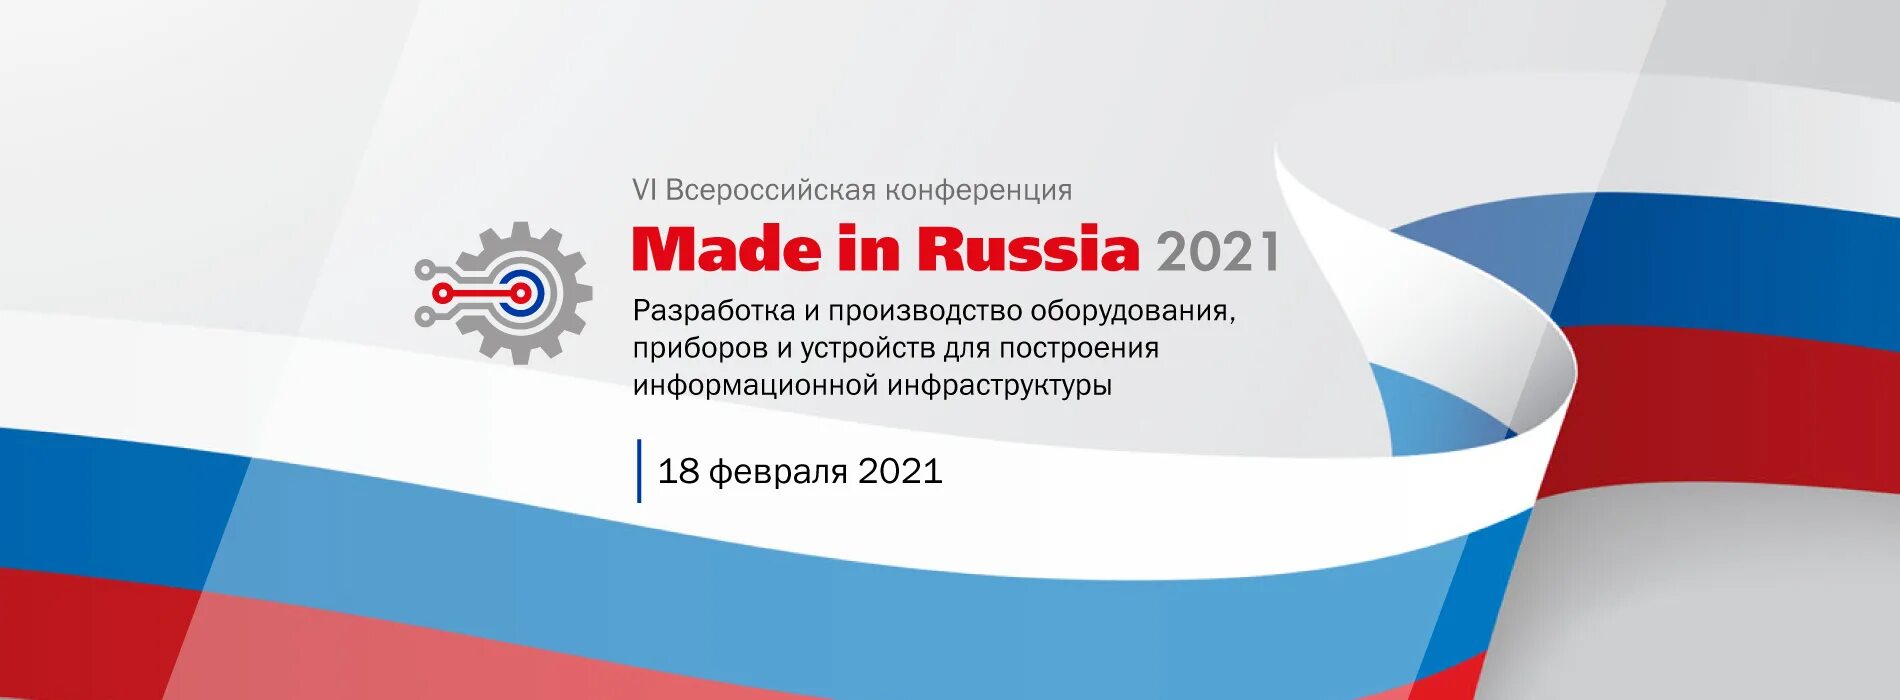 Russia 2021. Made in Russia. ЭХП made in Russia. Made in Russia выставка.